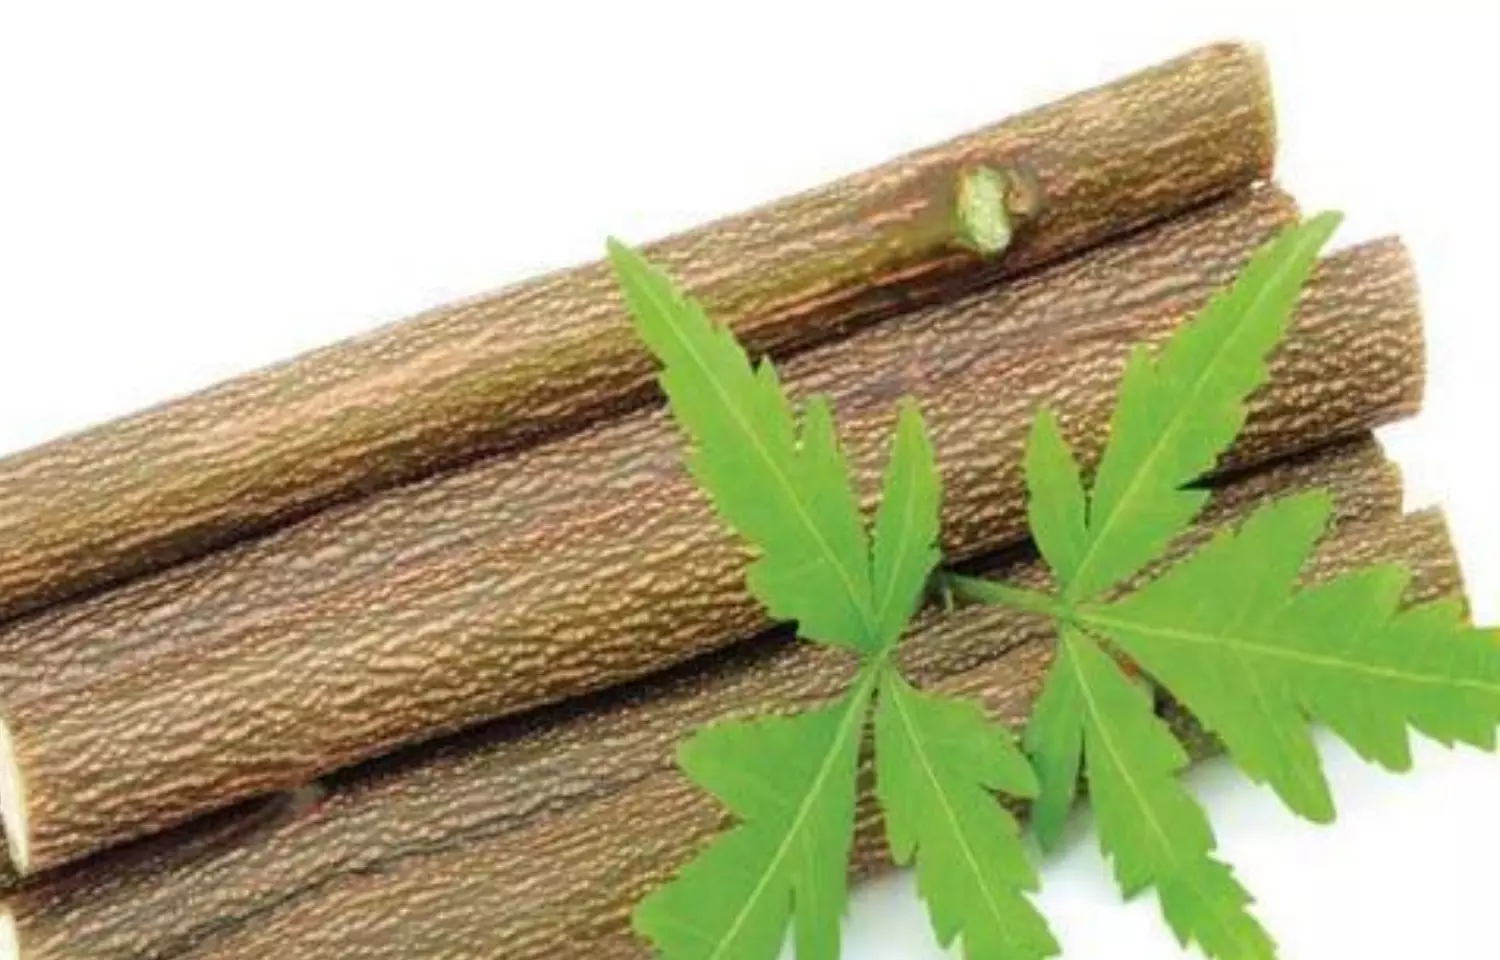 COVID- 19: Bark of Neem tree can protect against variants, suggests study